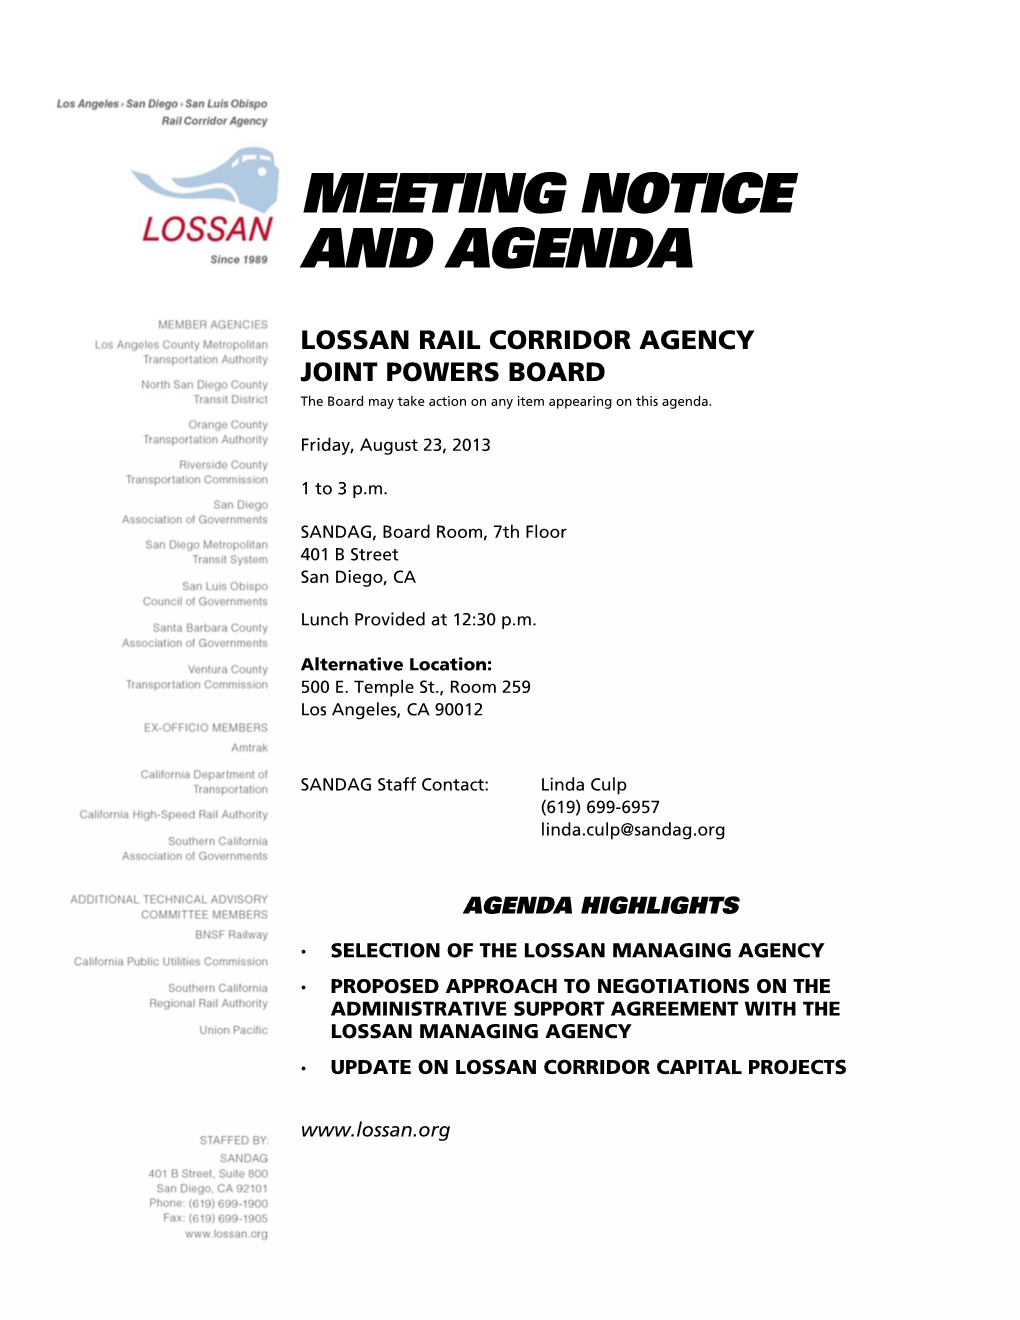 LOSSAN RAIL CORRIDOR AGENCY JOINT POWERS BOARD the Board May Take Action on Any Item Appearing on This Agenda